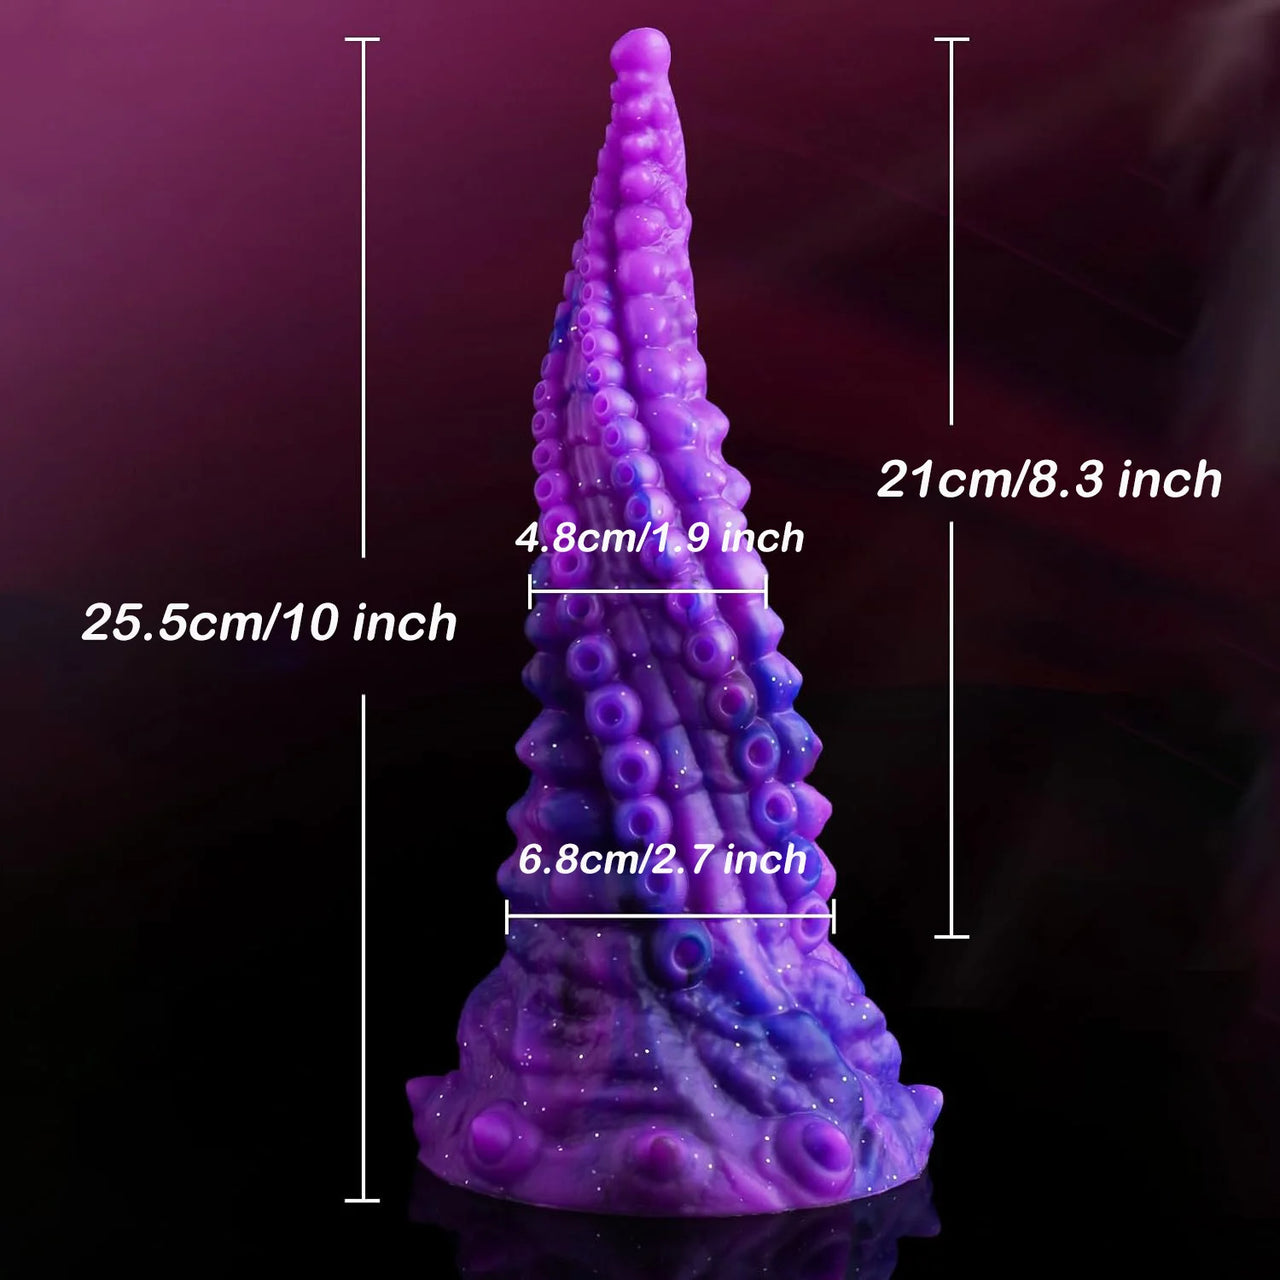 Fantasy Tentacle Spiral 10" Dildo With Strong Suction Cup